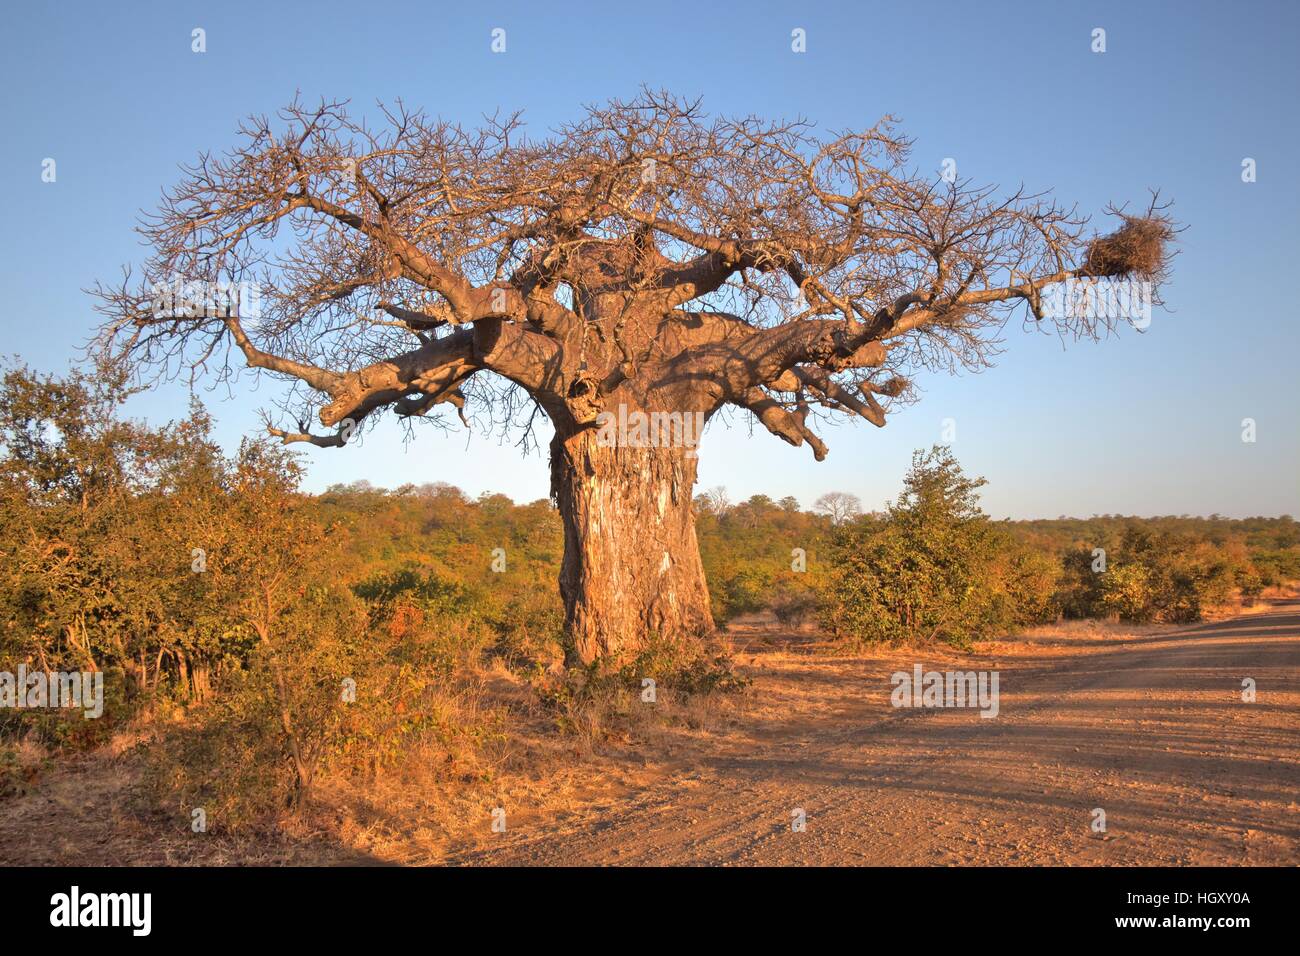 A magnificent Baobab tree on the side of a dust road in Kruger National Park, Mpumalanga. Stock Photo